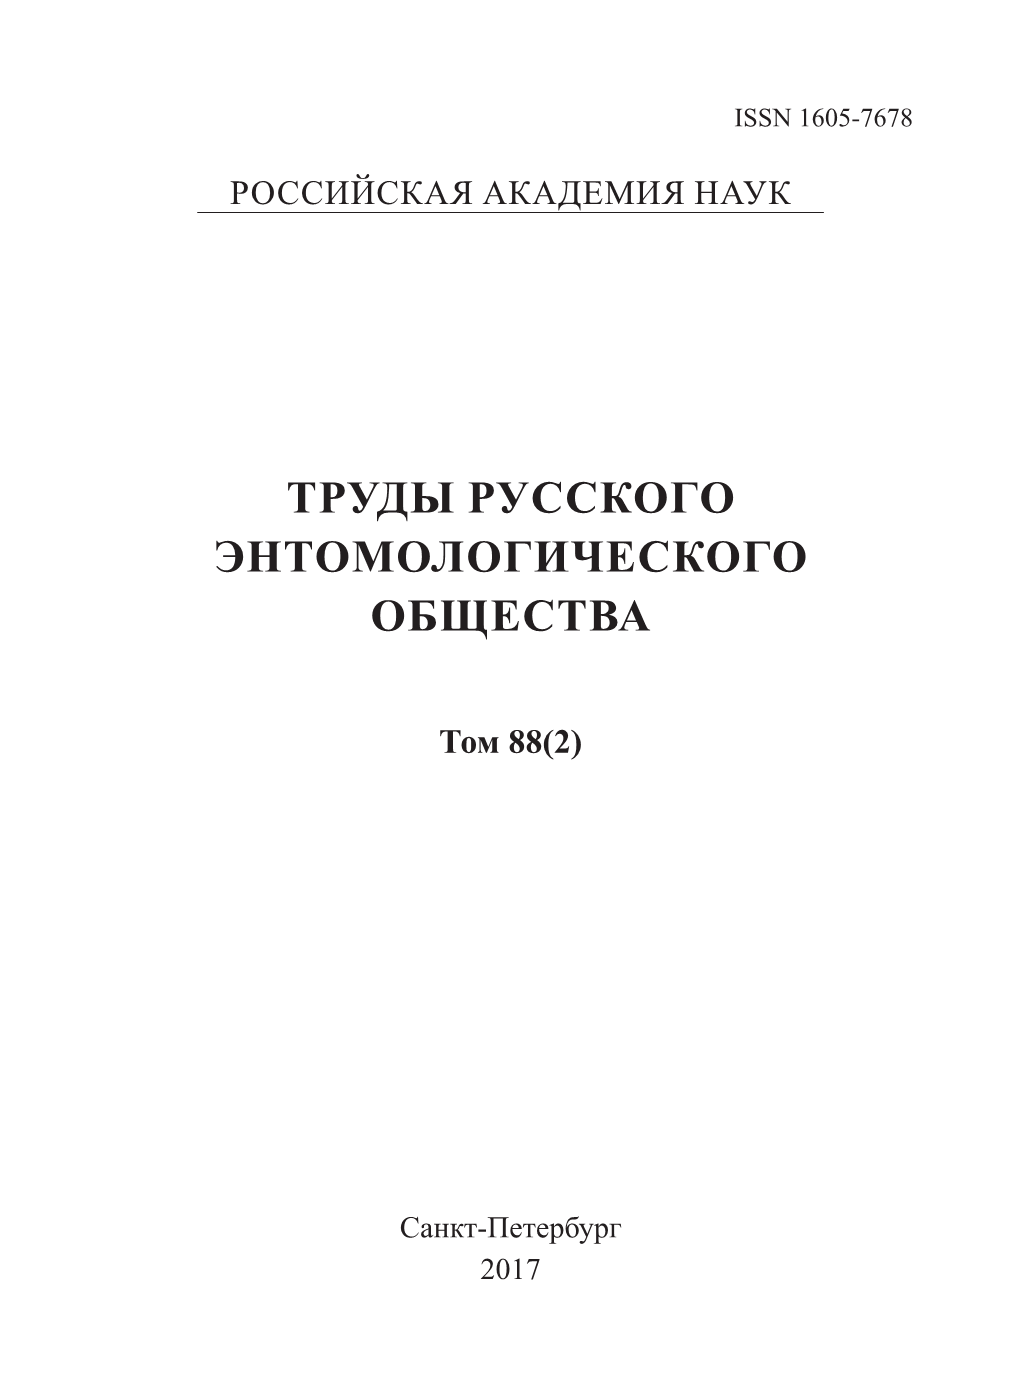 Proceedings of the Russian Entomological Society, Vol. 88(2